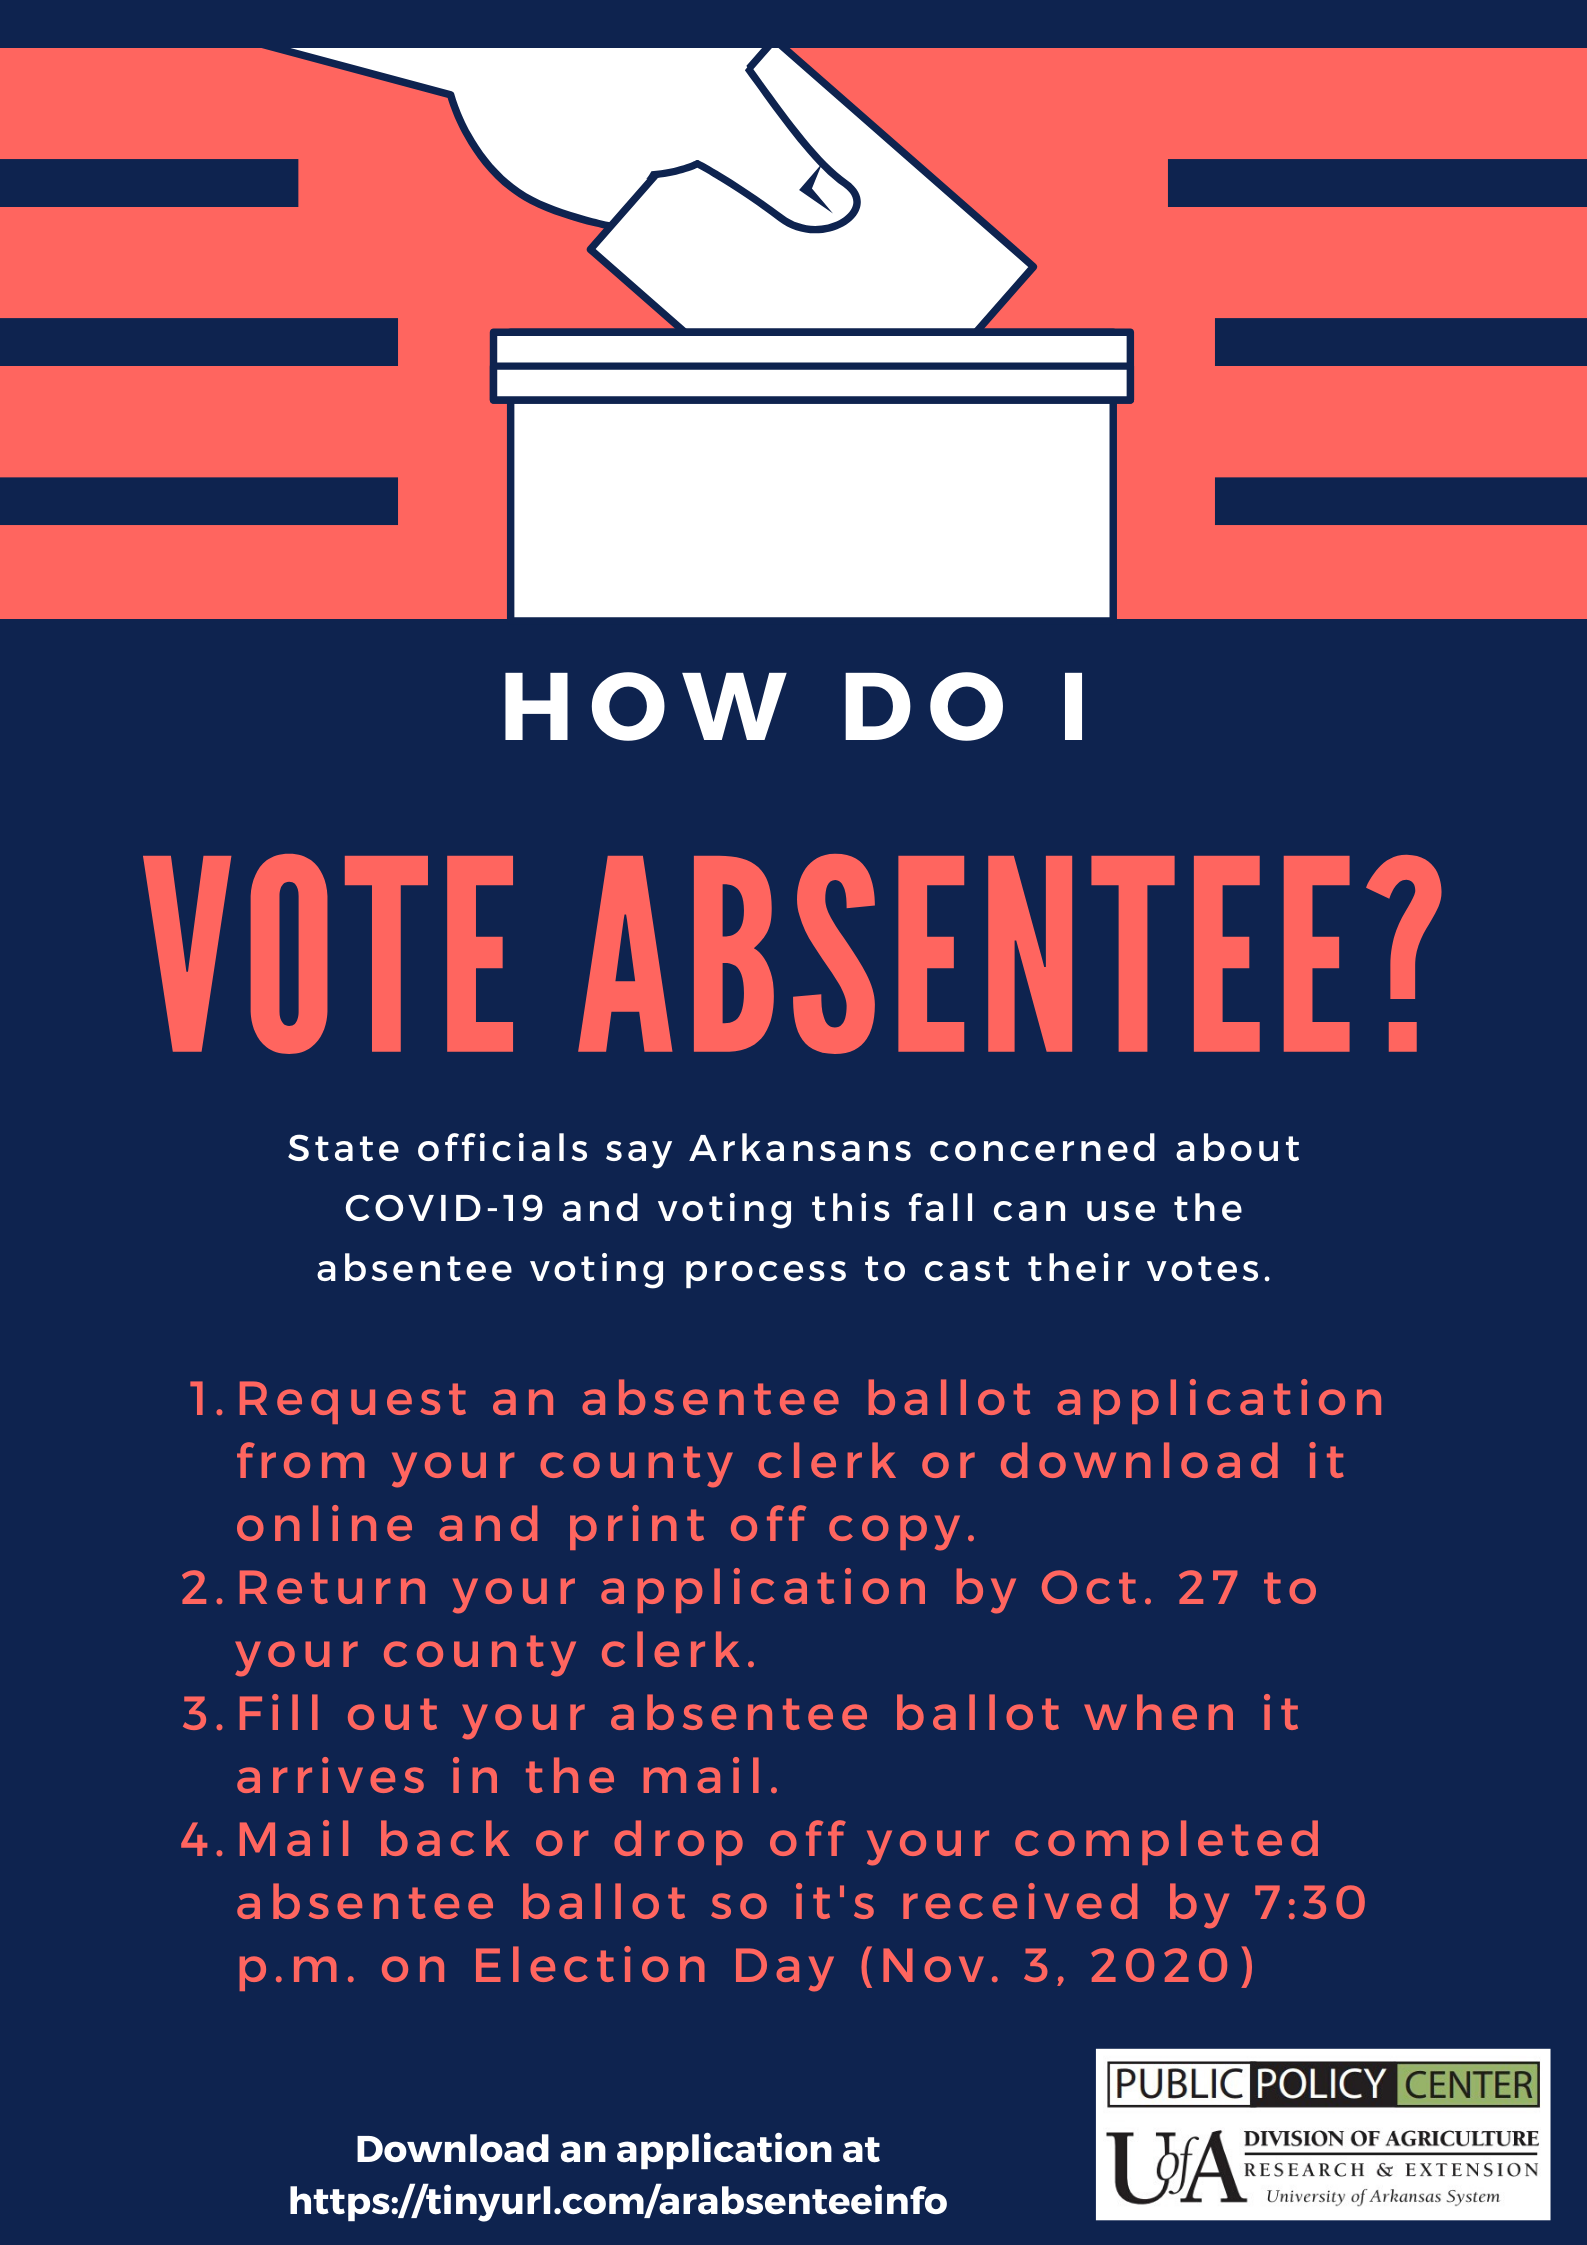 Covid19 and Absentee Voting in Arkansas